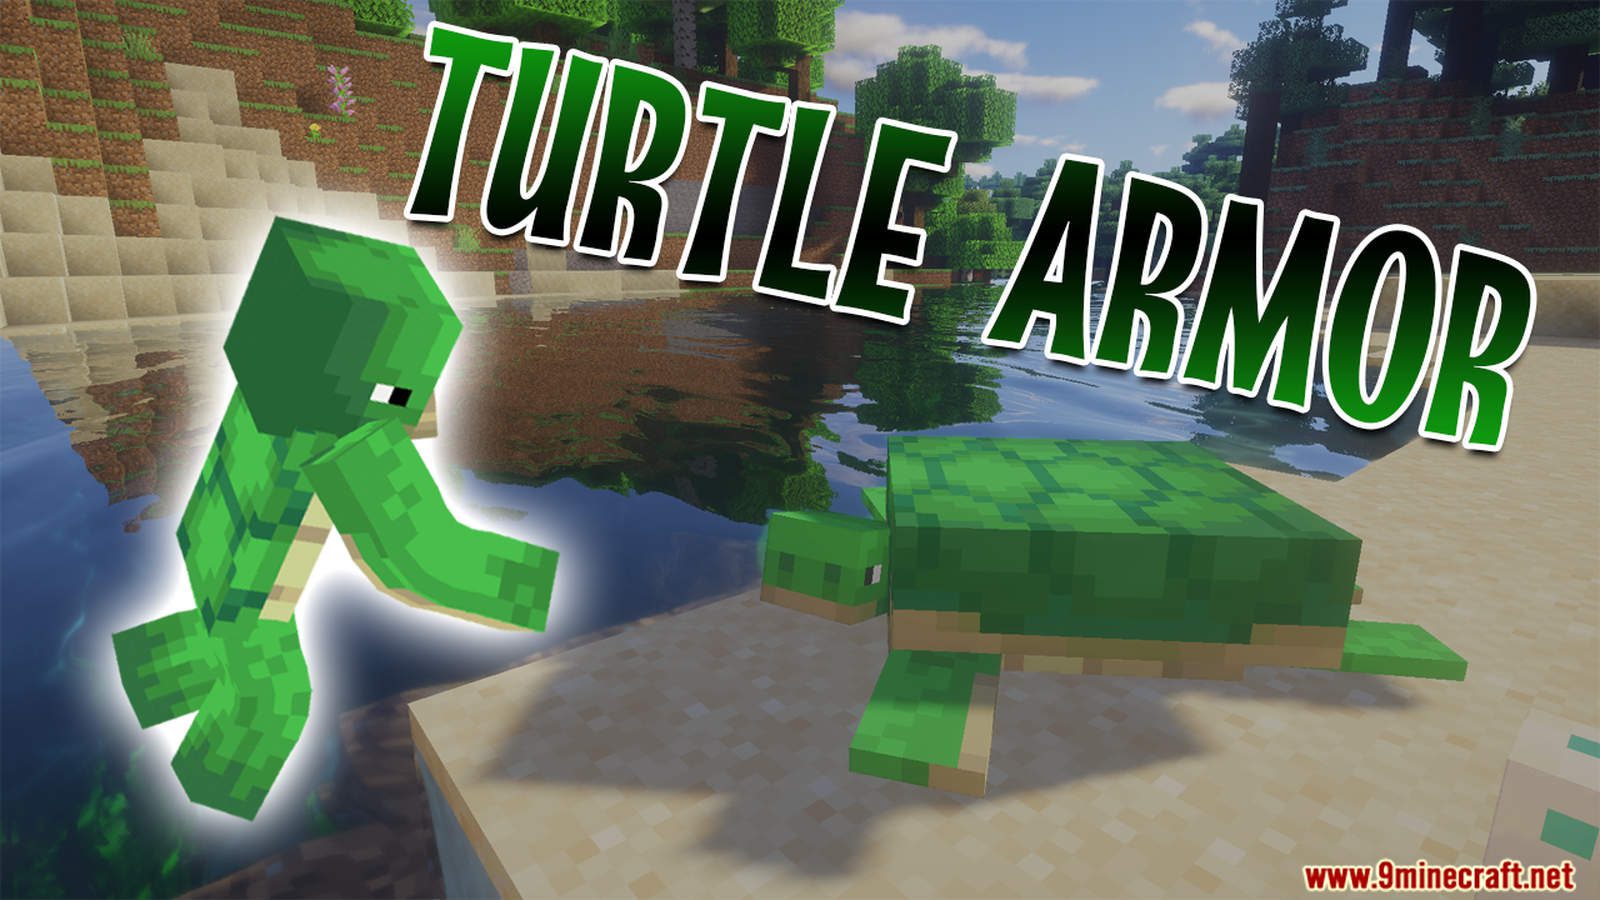 Full Turtle Armor Data Pack (1.18.2, 1.13.2) - Becomes a Turtle 1